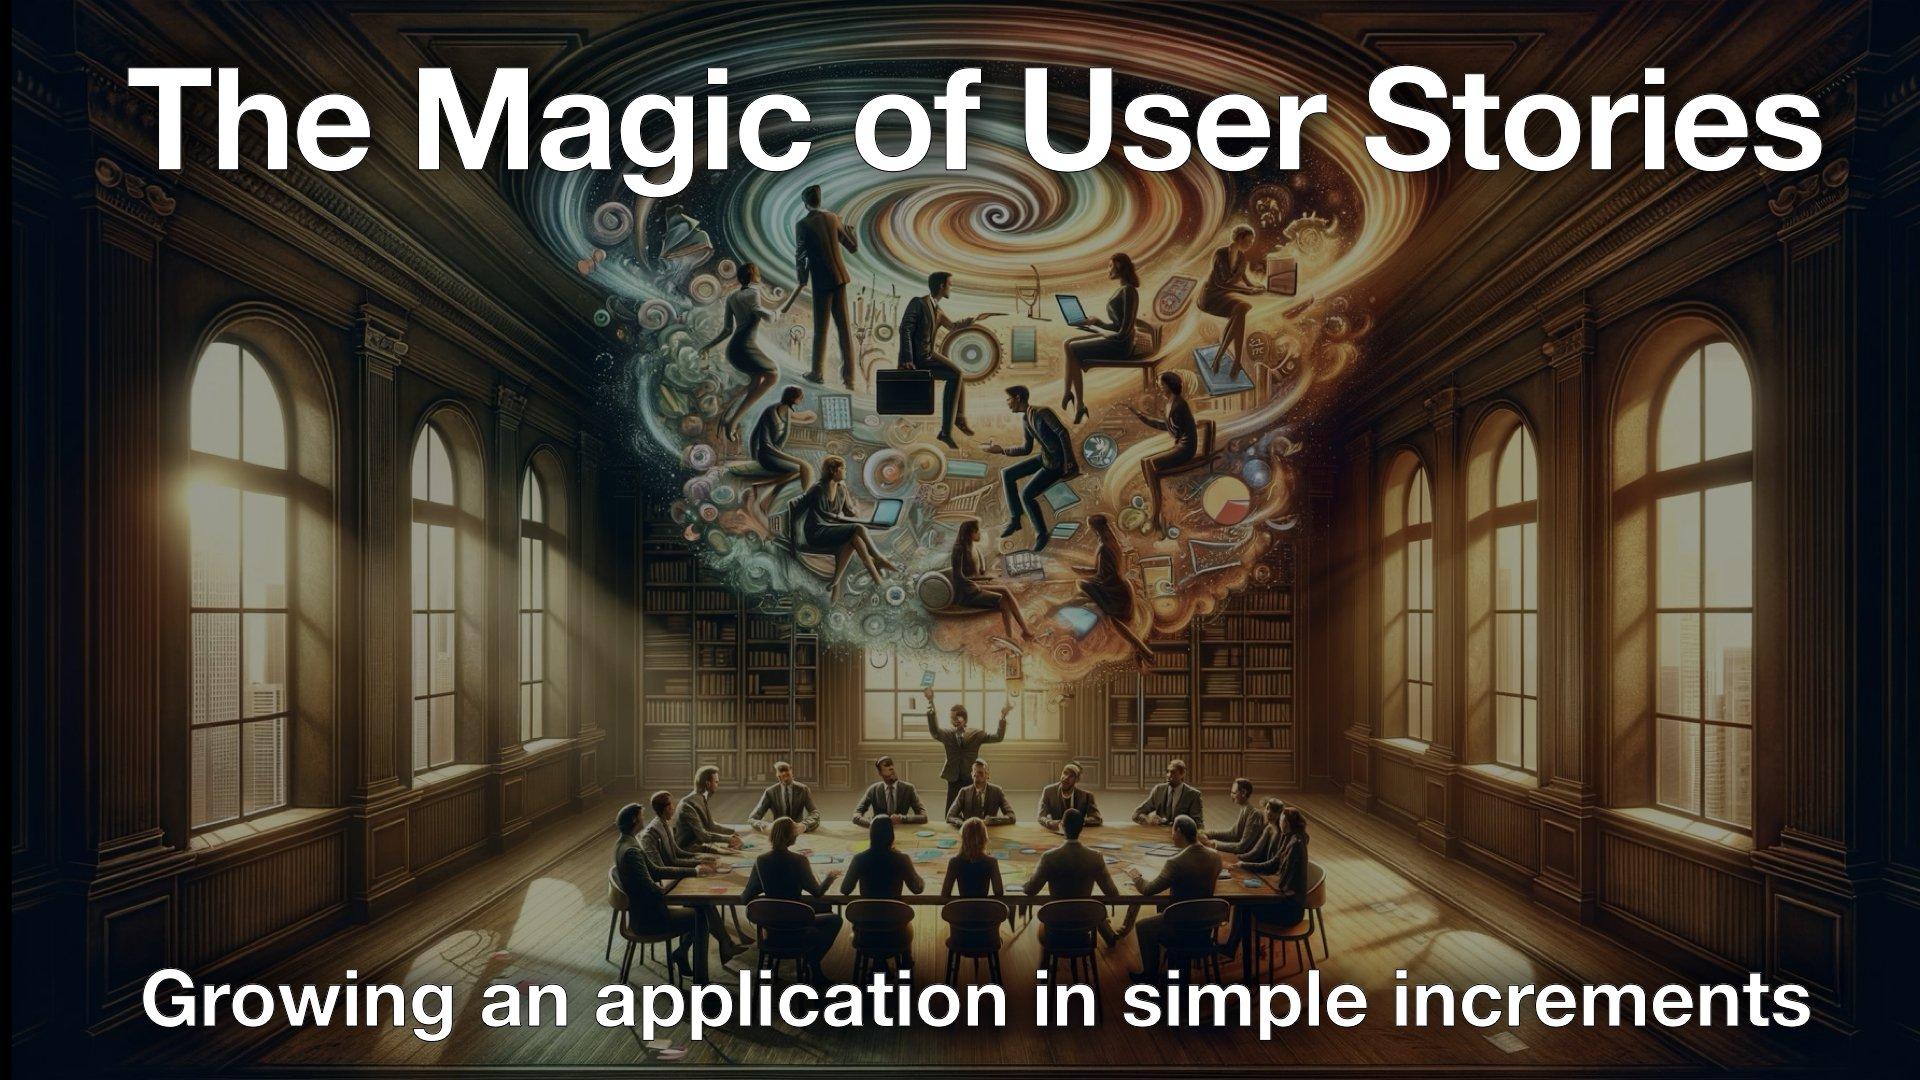 The Magic of User Stories - Growing an application with simple increments